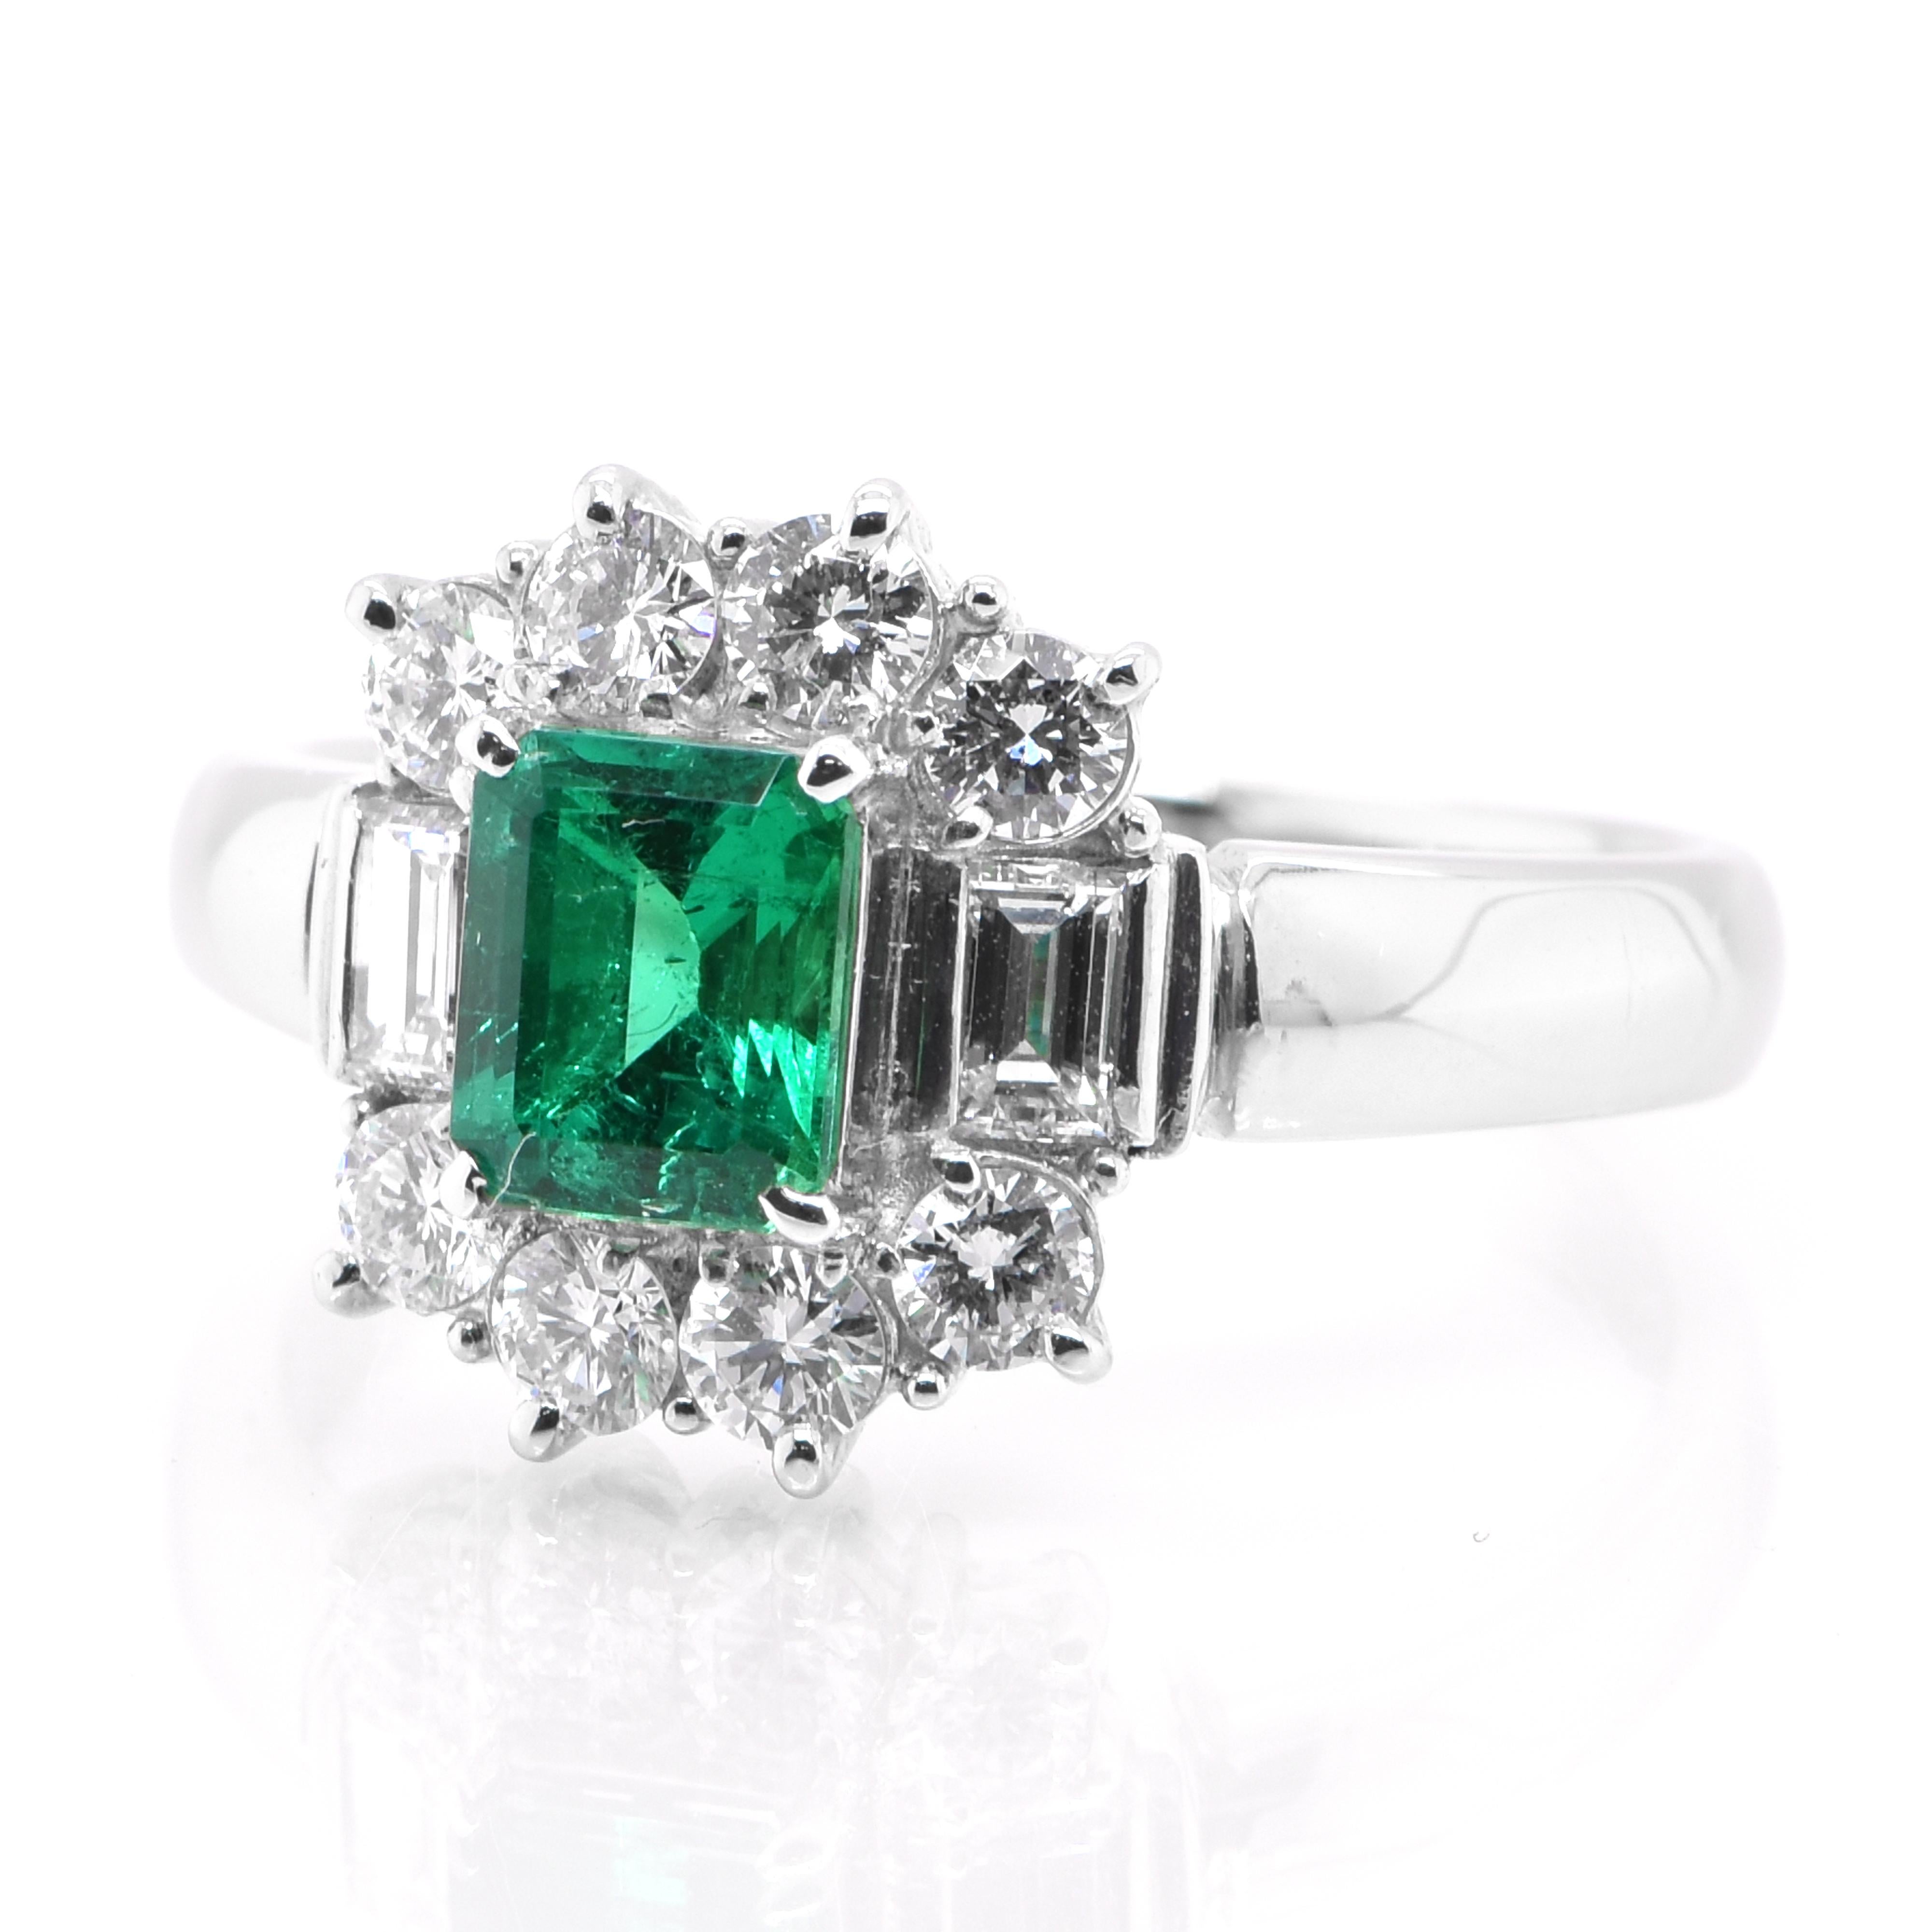 A stunning Halo ring featuring a 0.71 Carat, Natural, Emerald and 0.78 Carats of Diamond Accents set in Platinum. The Emerald displays exceptional color and clarity. People have admired emerald’s green for thousands of years. Emeralds have always